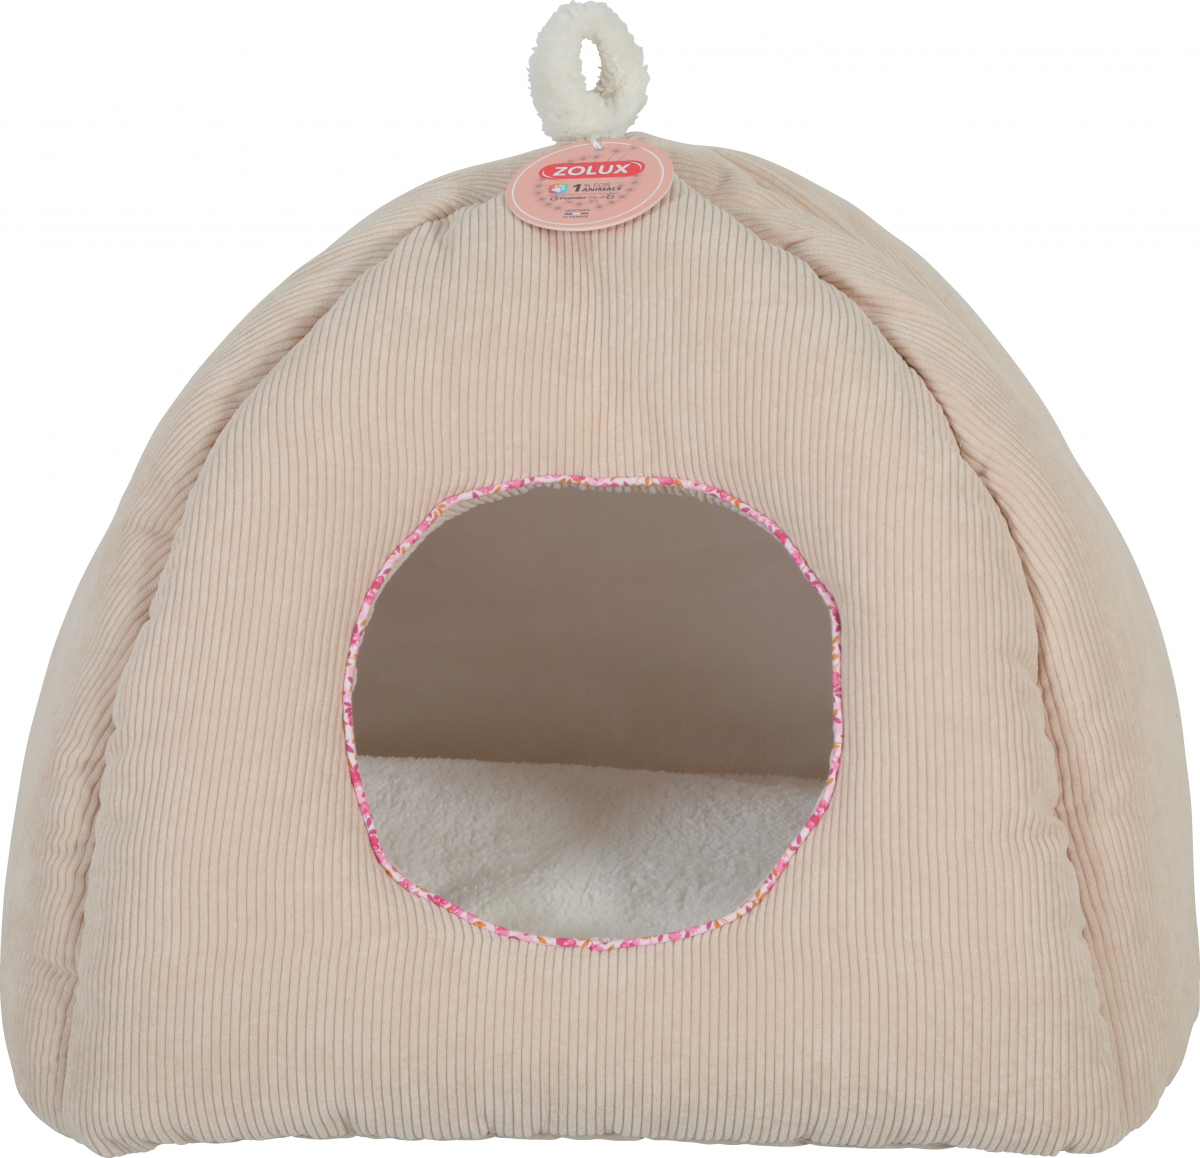 Niche igloo Bloom pour chat